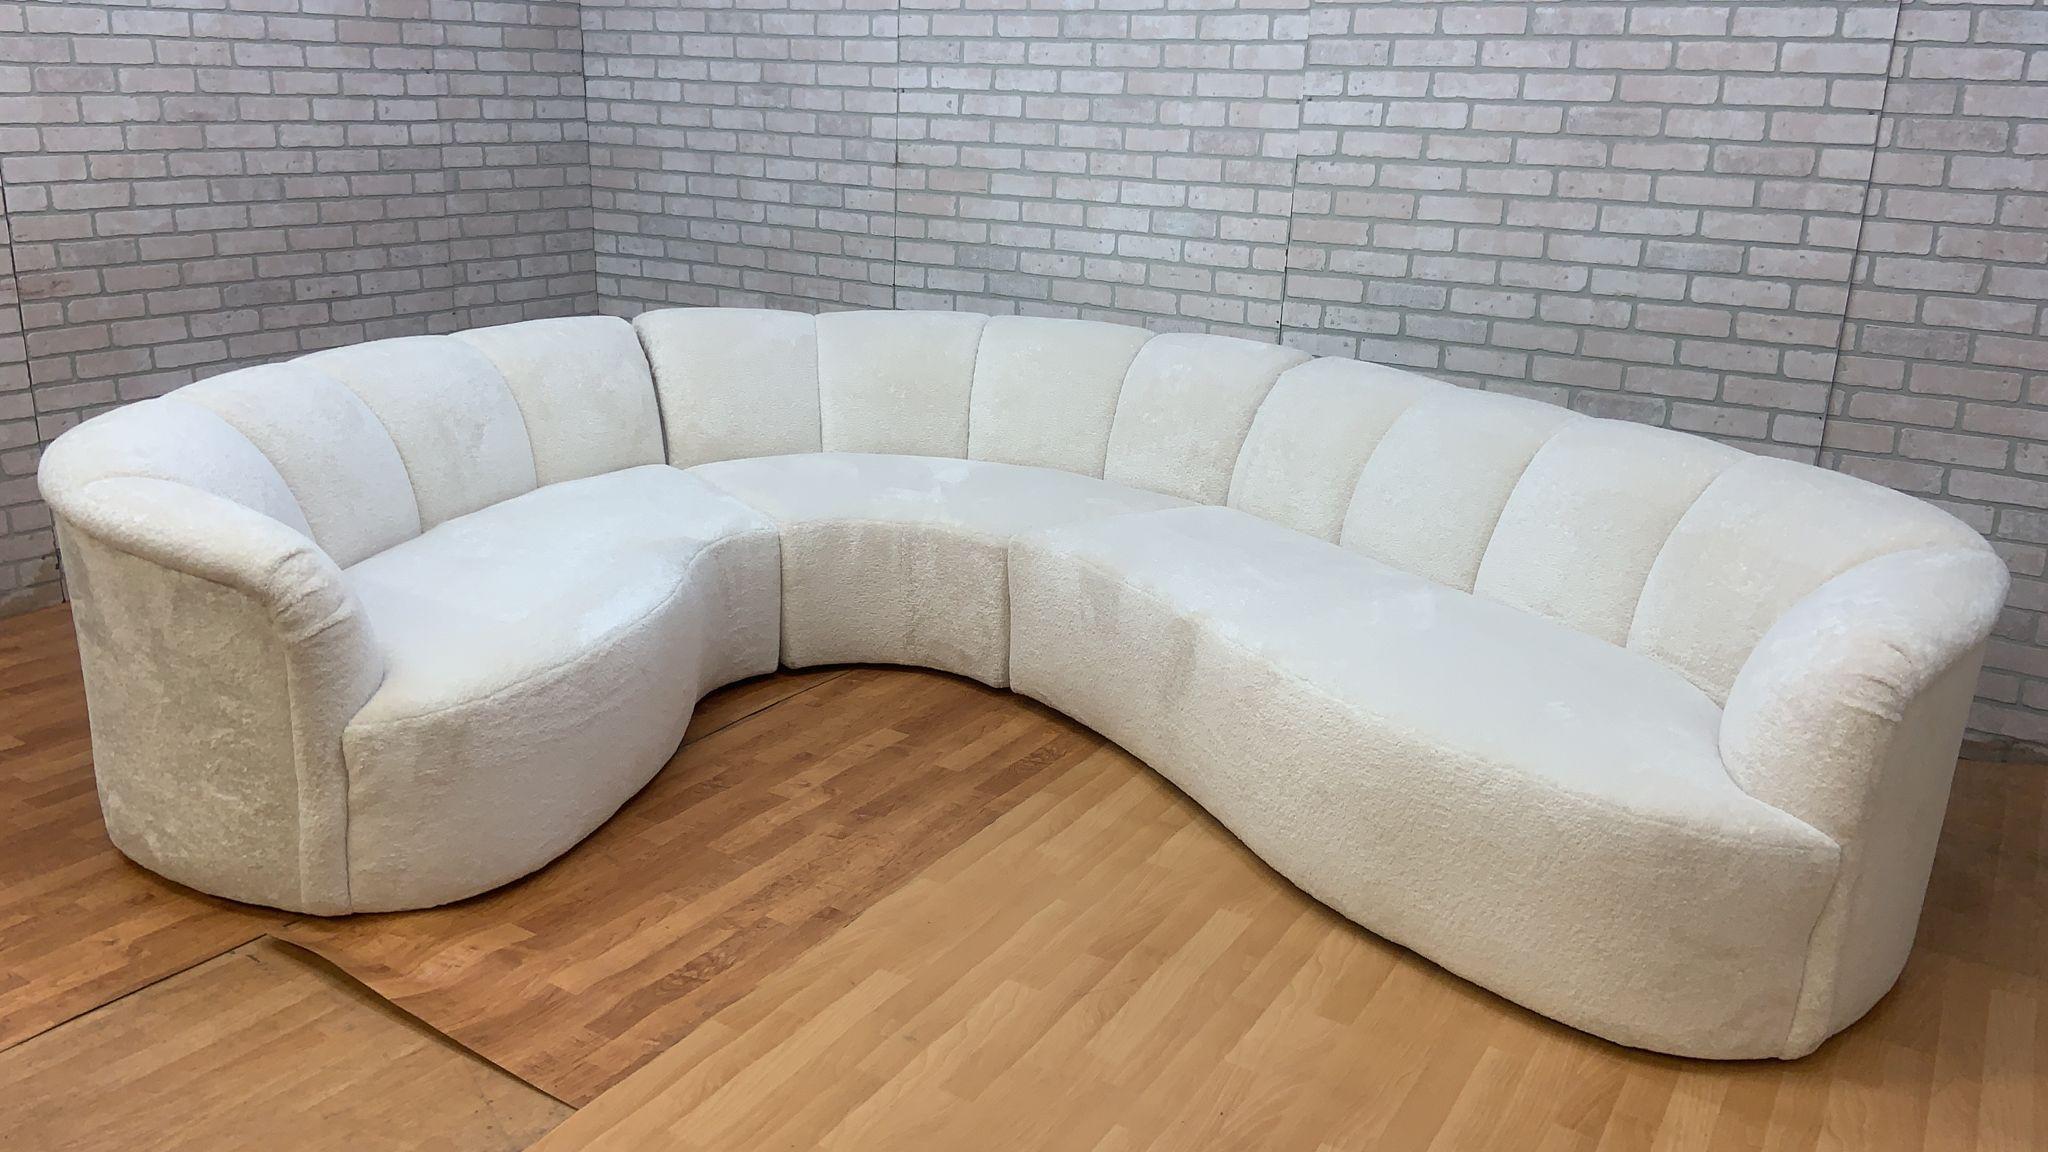 Mid-Century Modern Curved Channel Back Serpentine Sectional Sofa Newly Upholstered in Alpaca Wool